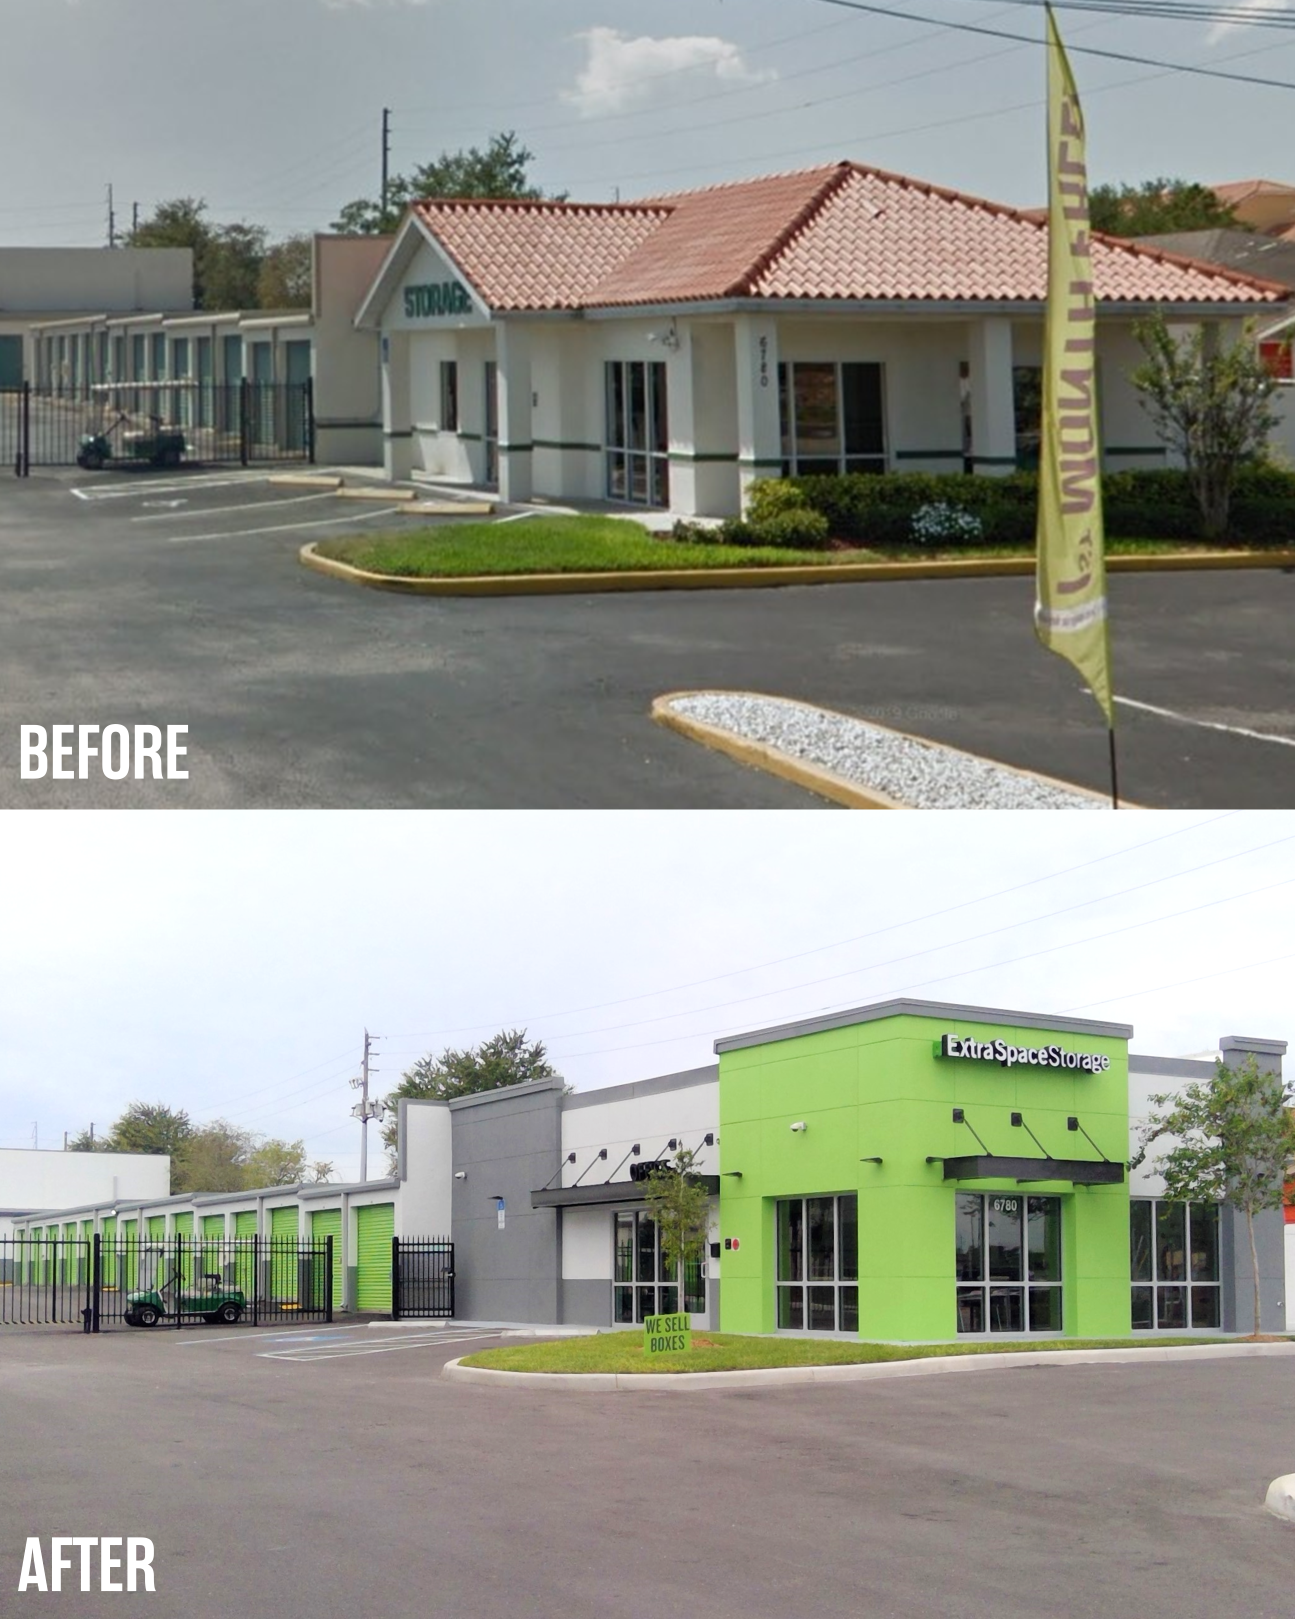 Before & After Image for Extra Space Storage Facility Update: 6780 Seminole Blvd, Seminole, FL